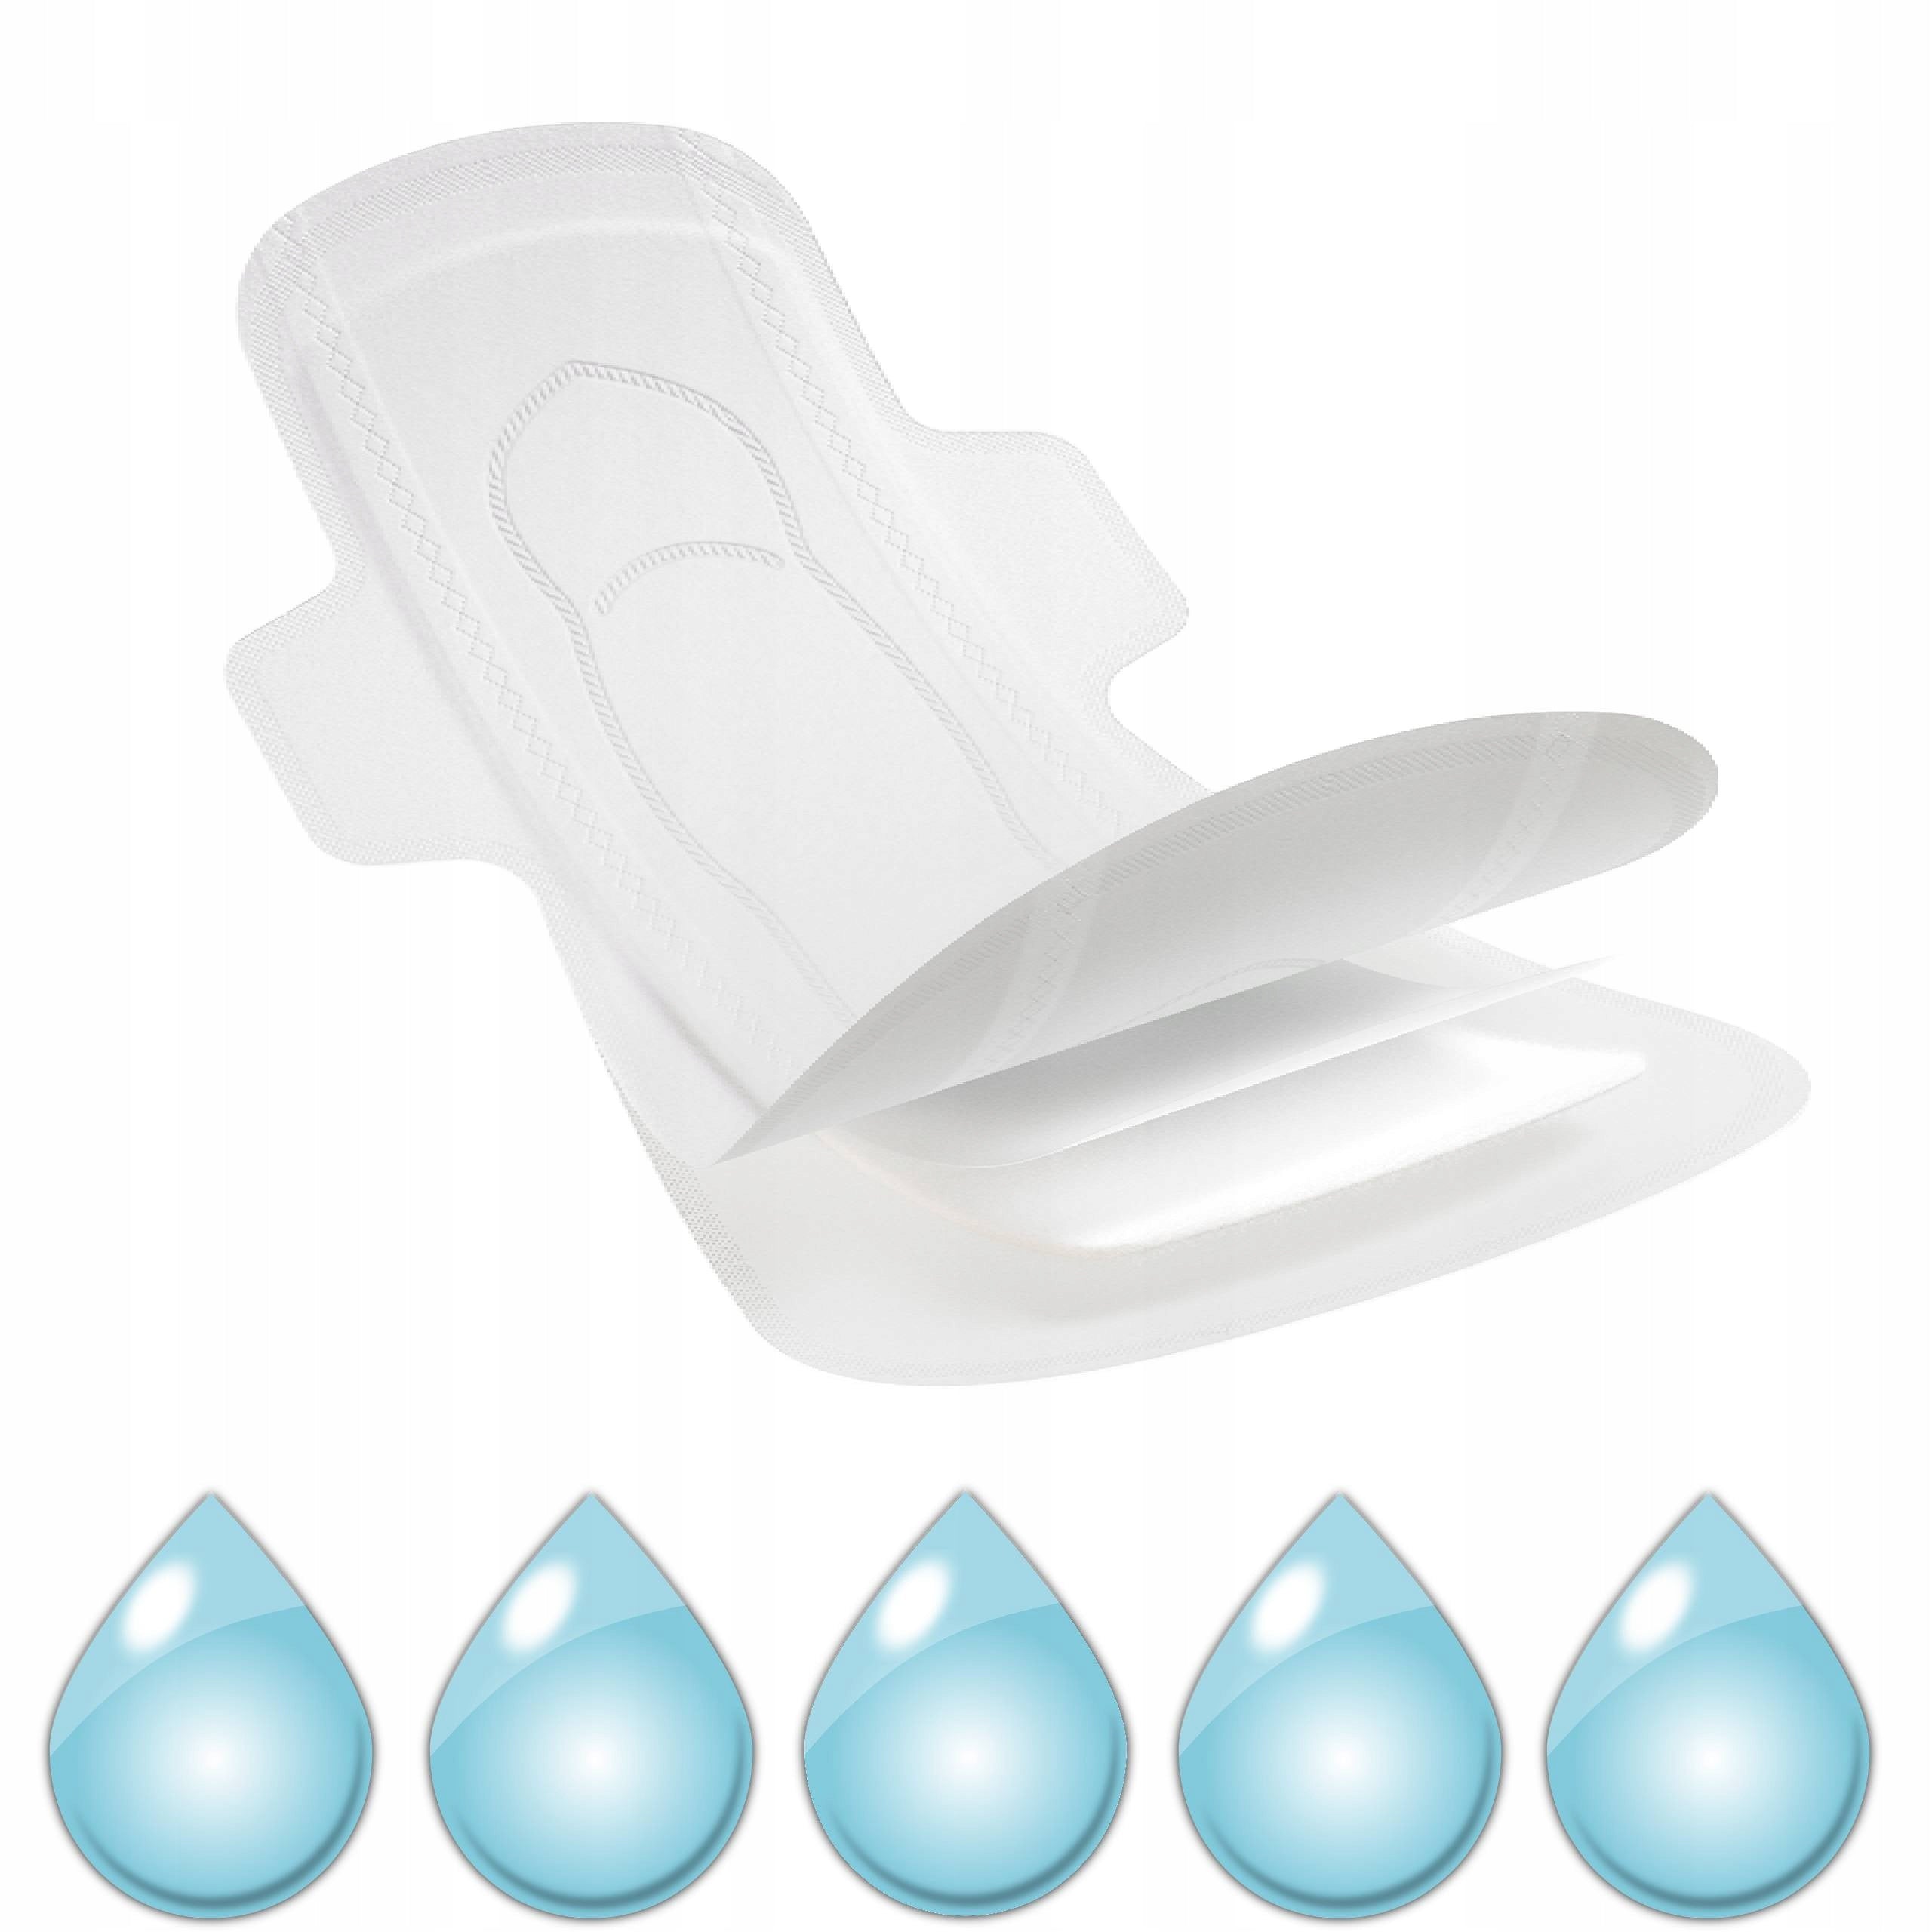 Canpol Babies: Discreet postpartum sanitary napkins with wings for the day of 10 pcs.